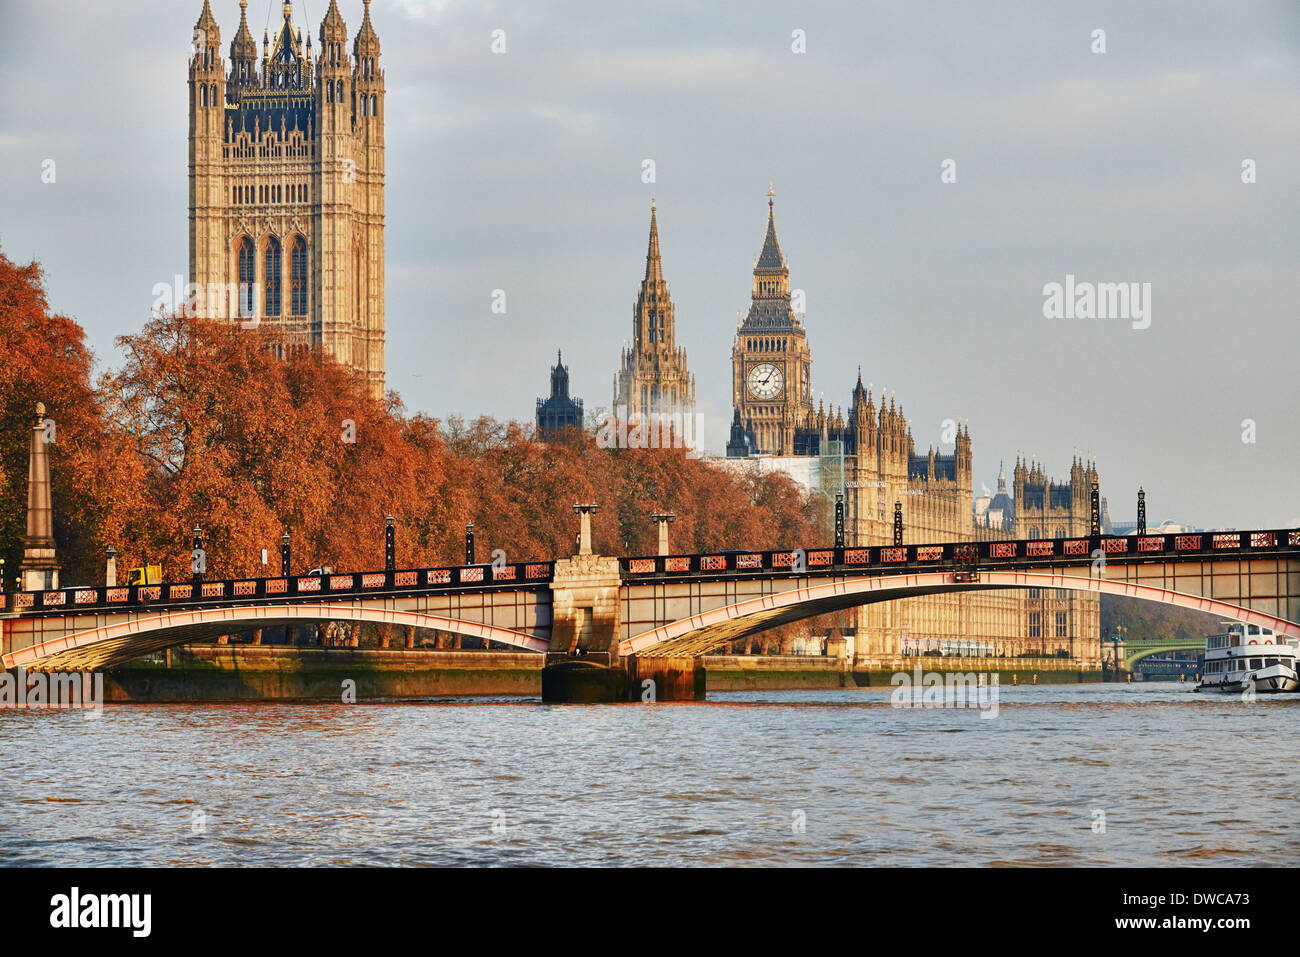 View of Lambeth Bridge, Houses of Parliament and the Thames, London, UK Stock Photo